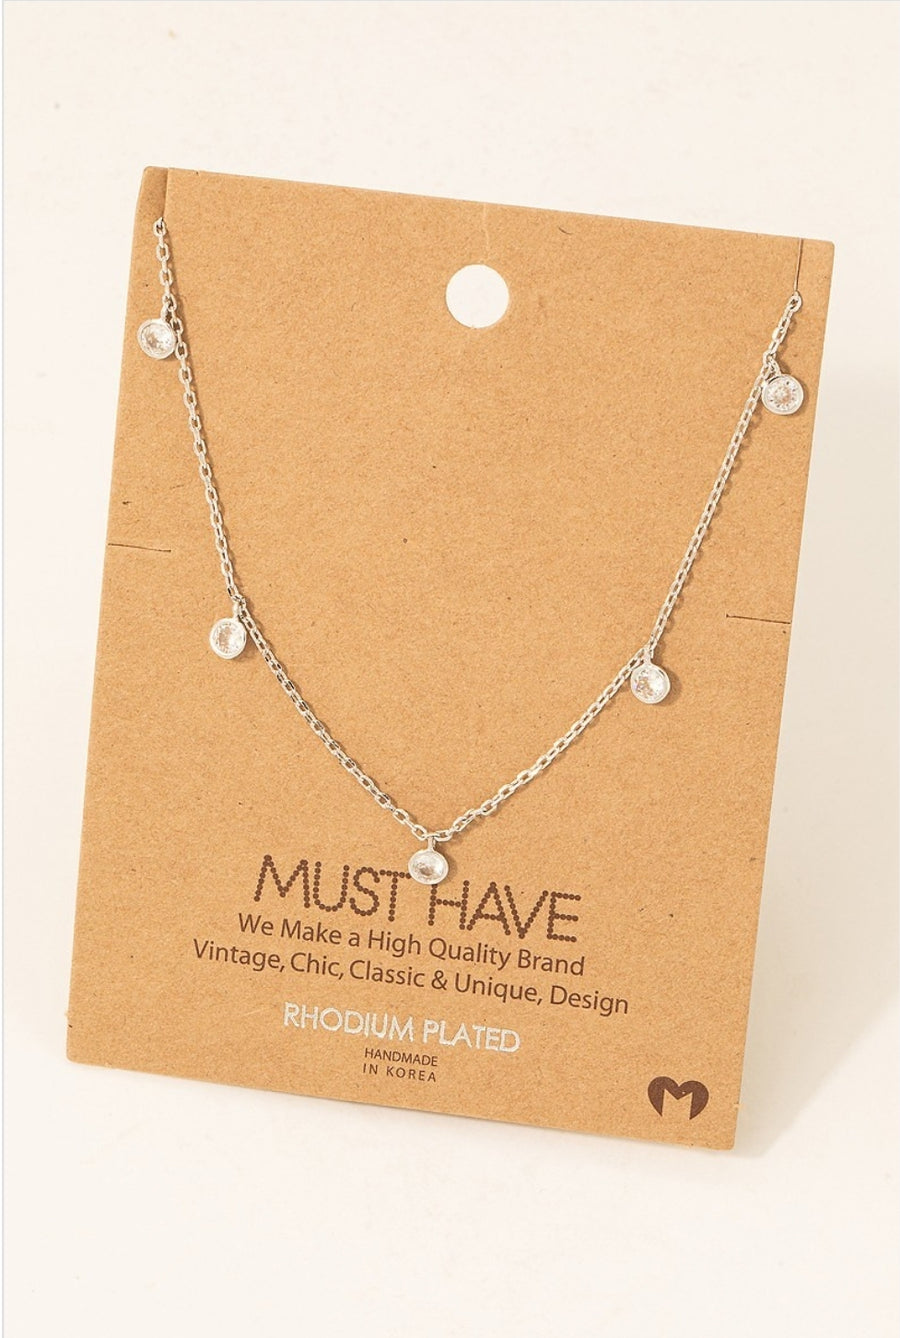 Must Have Necklaces